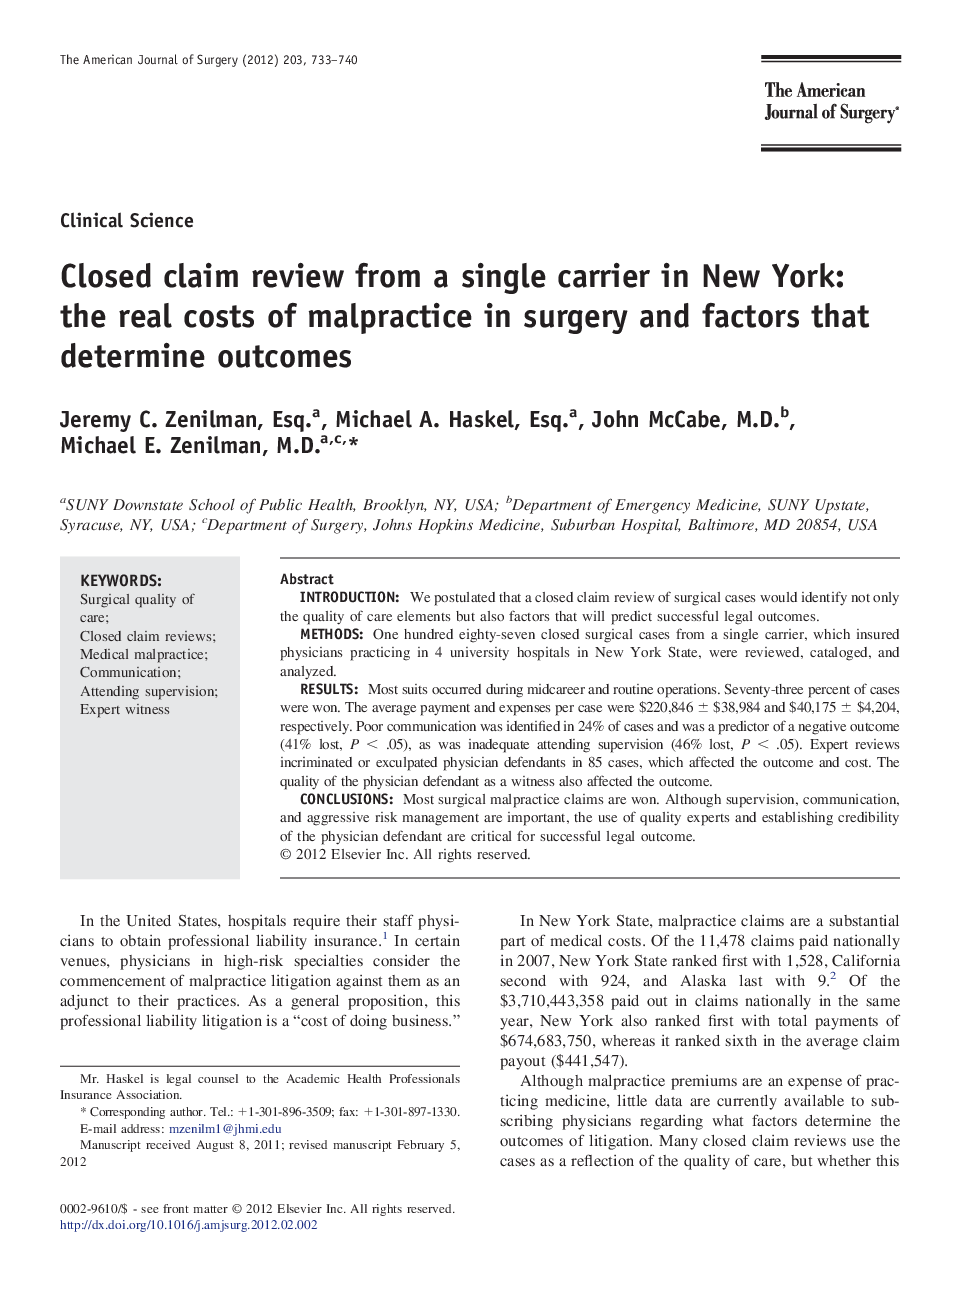 Closed claim review from a single carrier in New York: the real costs of malpractice in surgery and factors that determine outcomes 